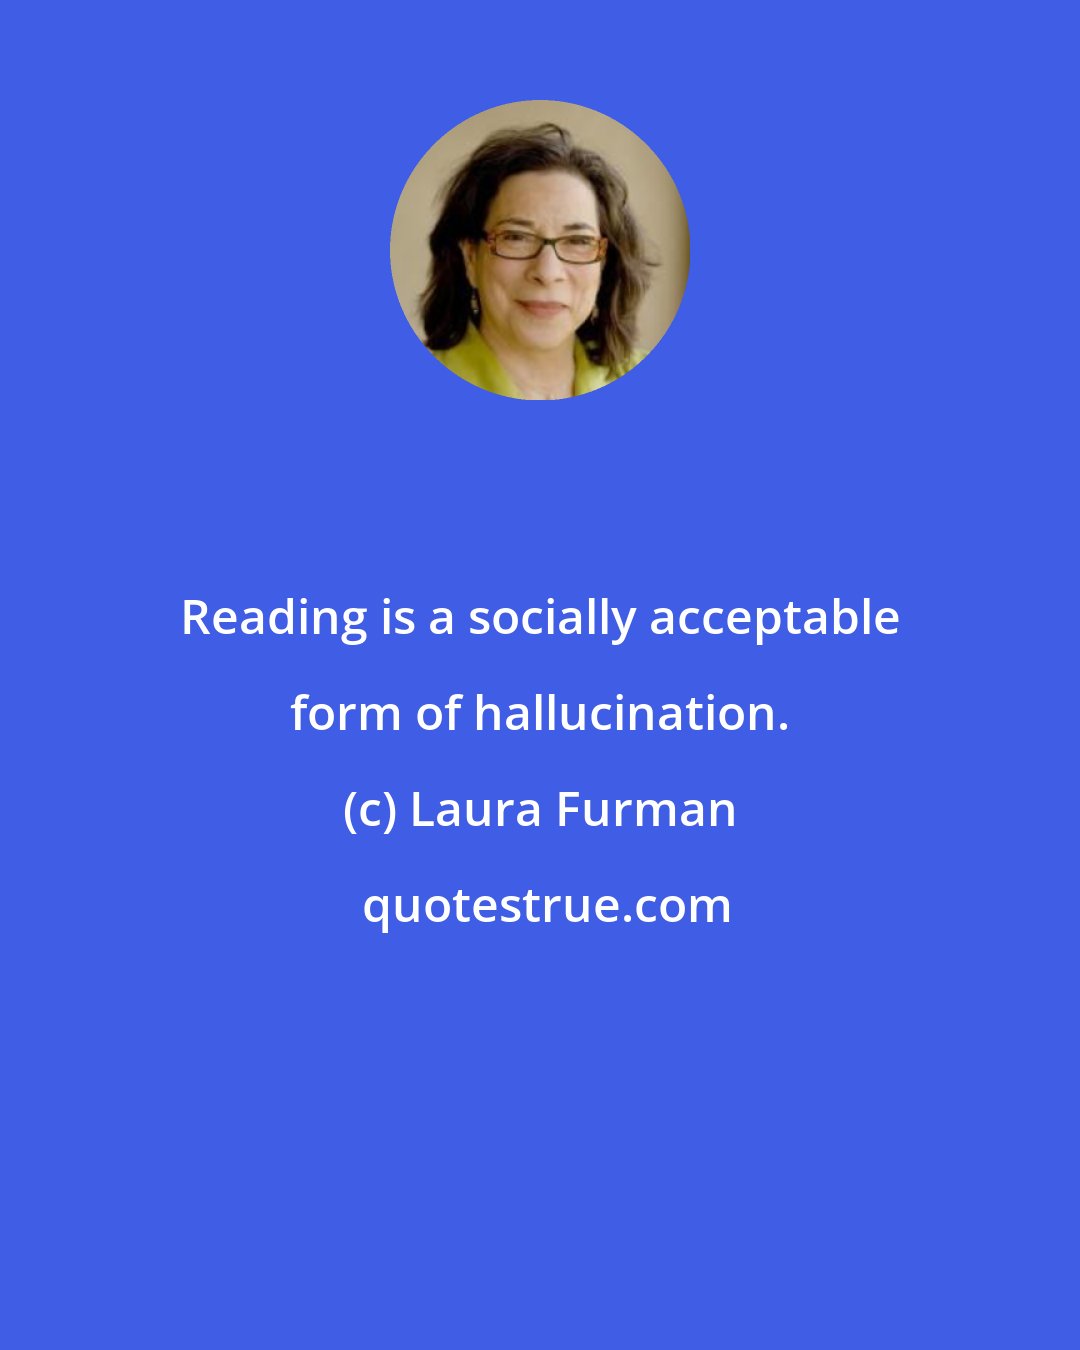 Laura Furman: Reading is a socially acceptable form of hallucination.